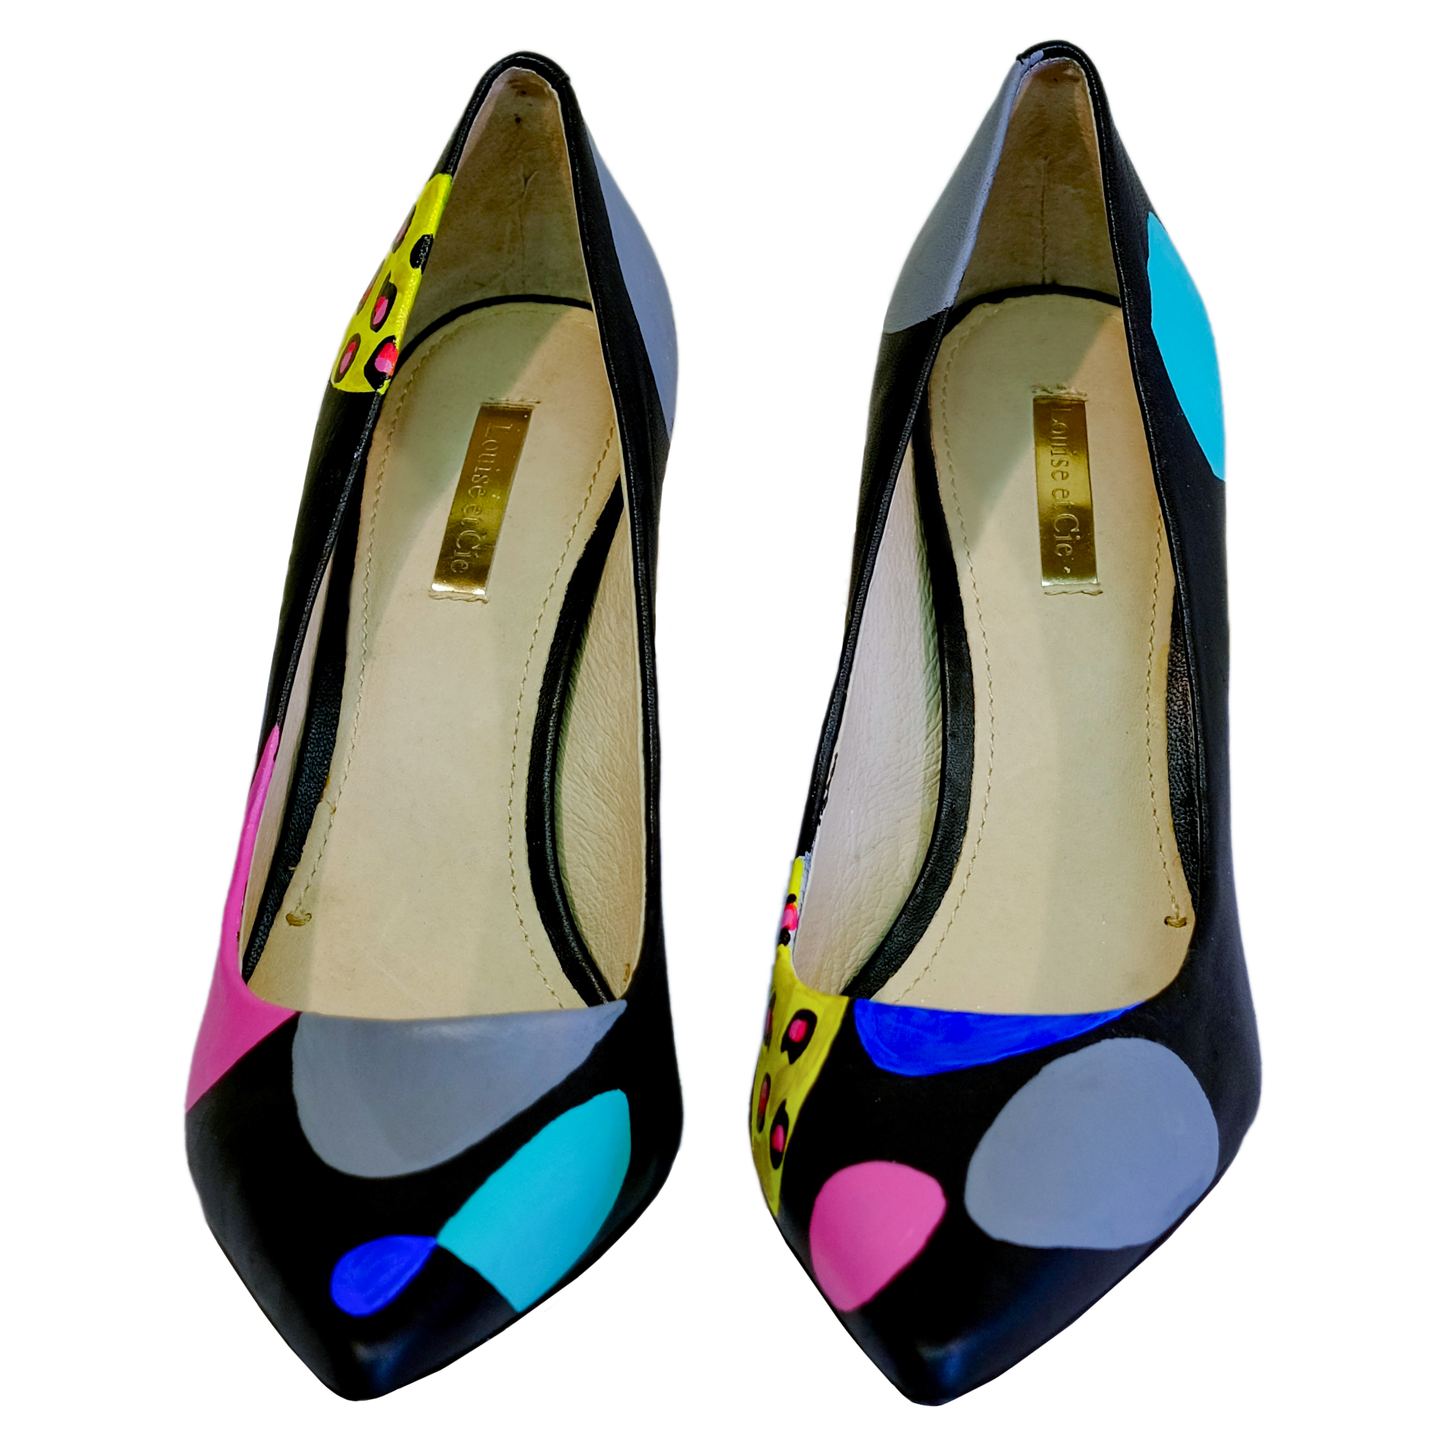 Modern Art - Louise Et Cie Pumps - Size 10 - Hand Painted by Matthew Phipps Hines